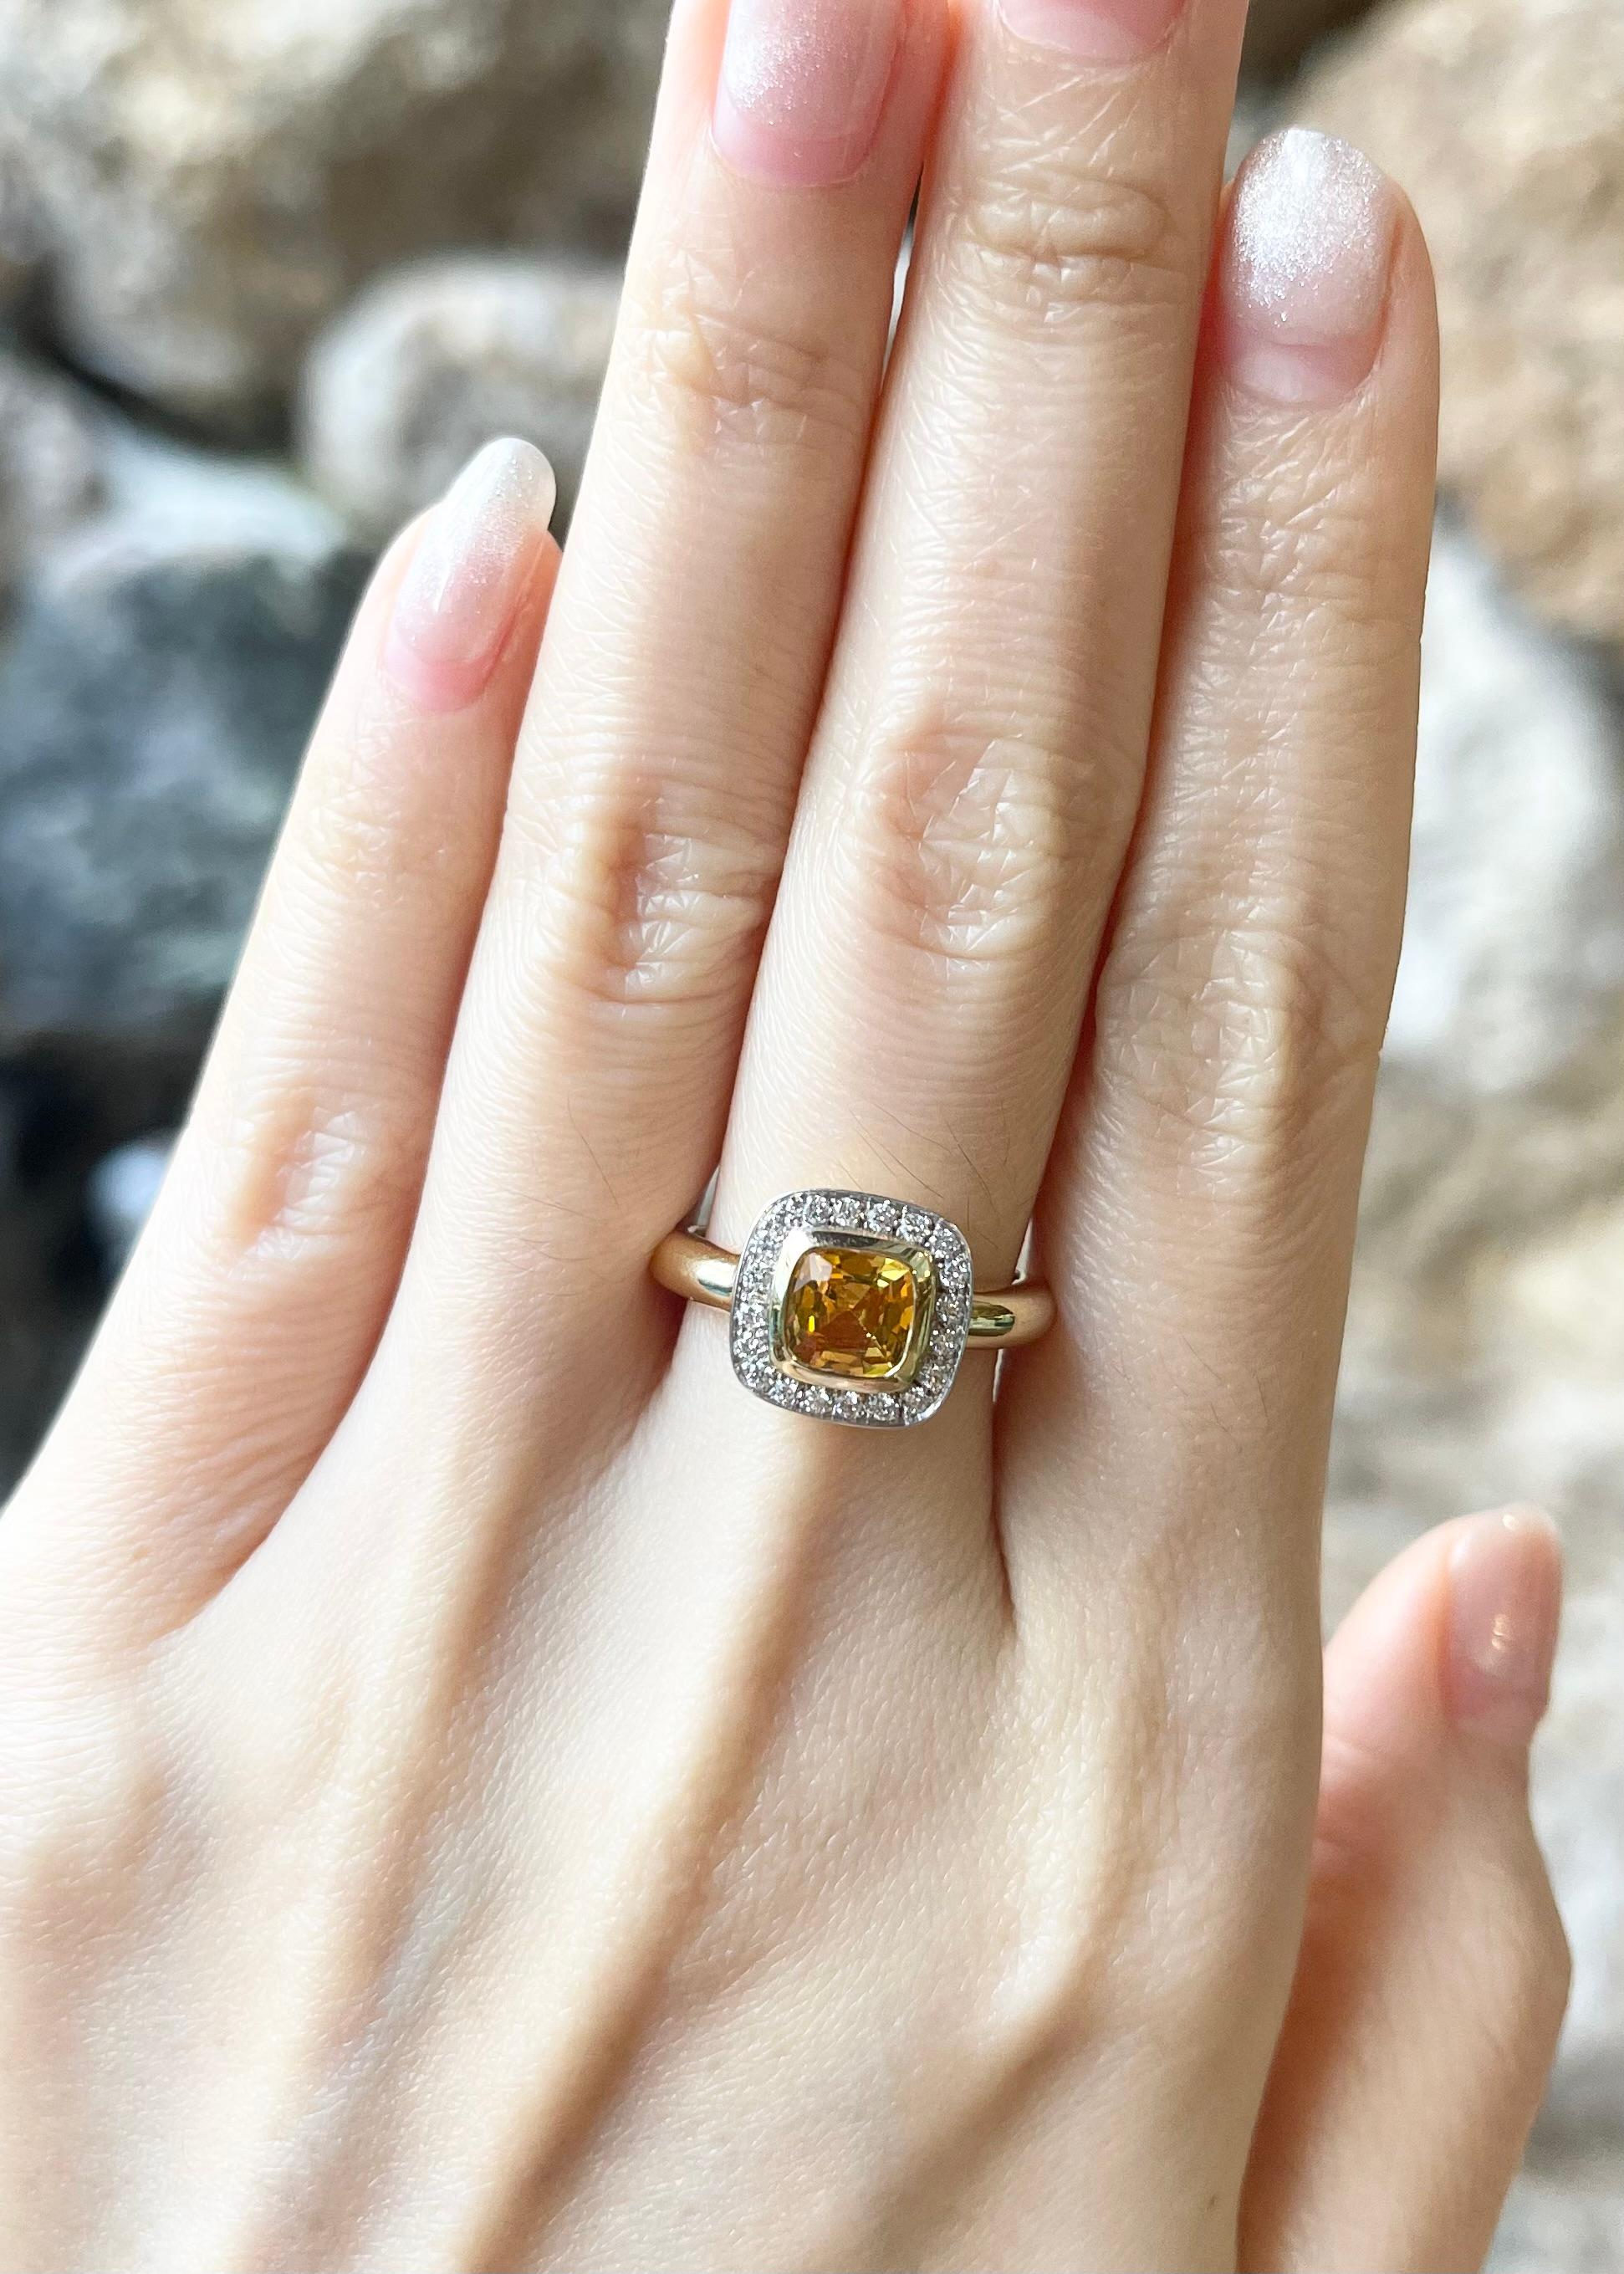 Yellow Sapphire 1.14 carats with Diamond 0.19 carat Ring set in 18K Gold Settings

Width:  1.1 cm 
Length: 1.1 cm
Ring Size: 53
Total Weight: 6.04 grams

